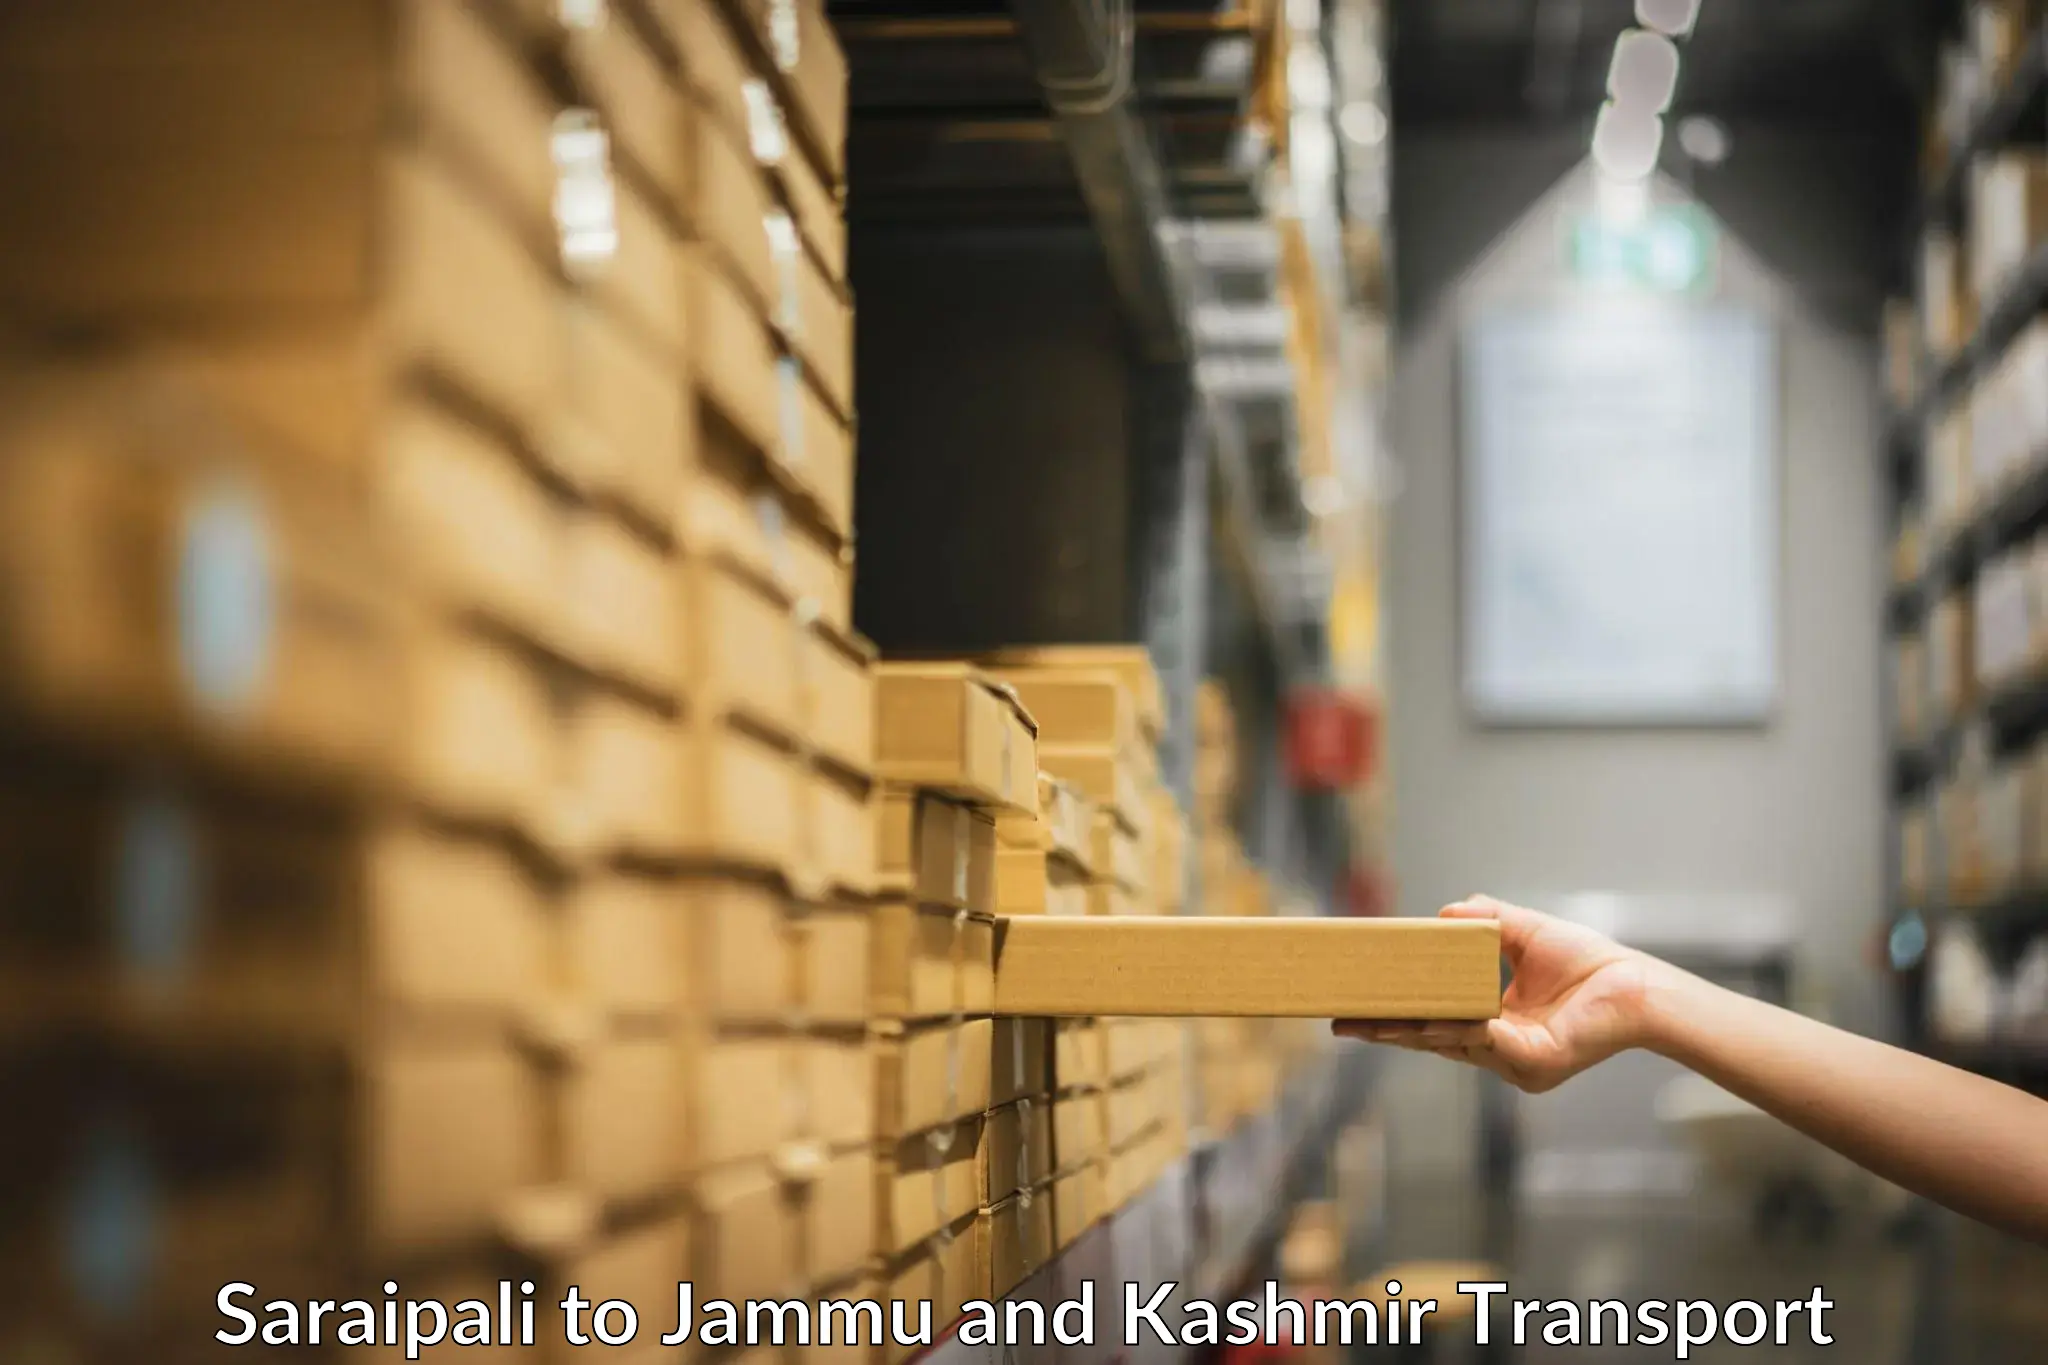 Express transport services in Saraipali to Anantnag